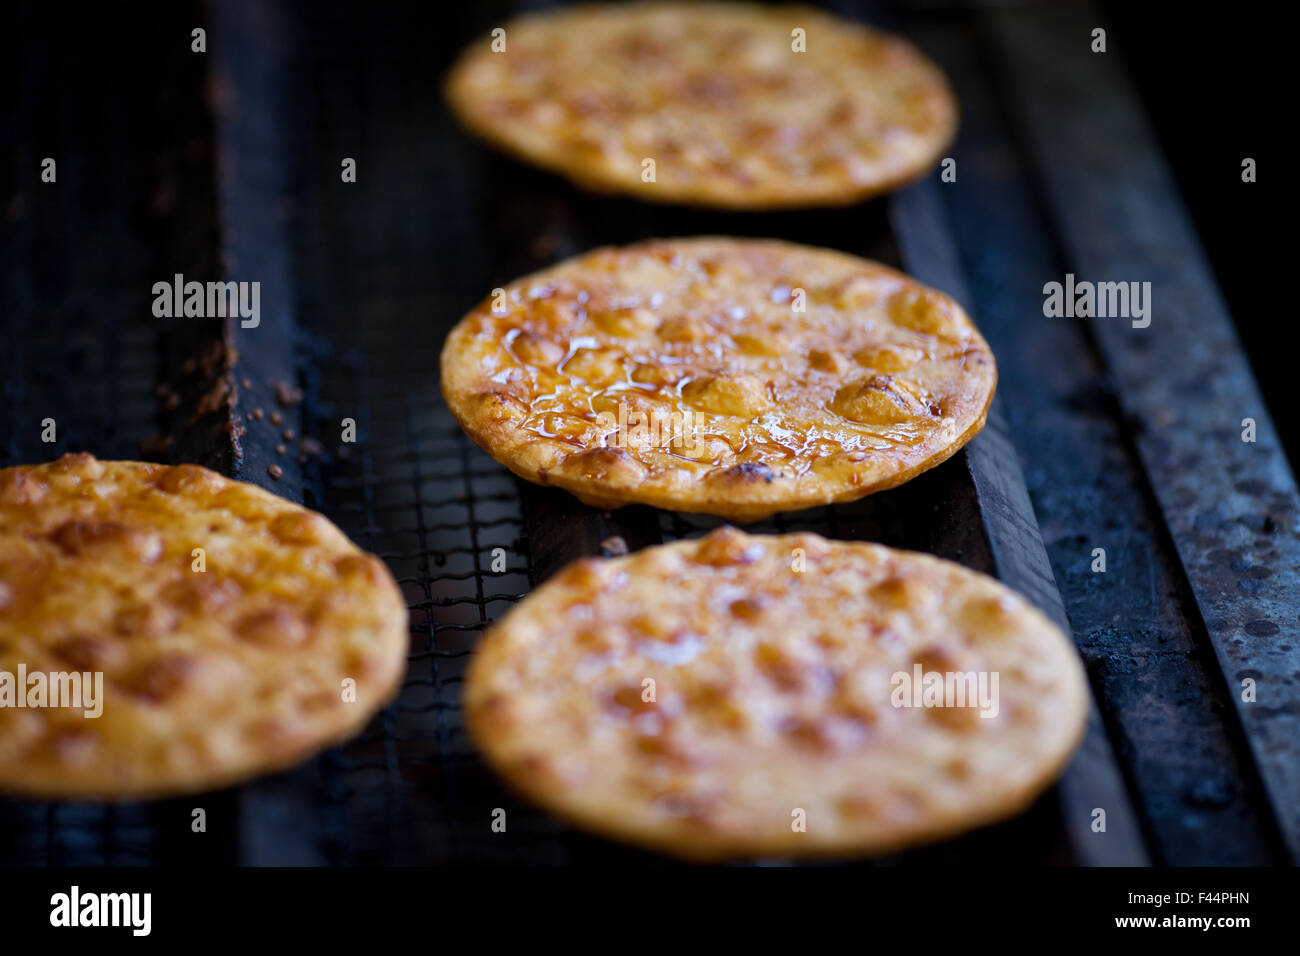 Japanese rice cracker cooking on grill with soy sauce glaze Stock Photo